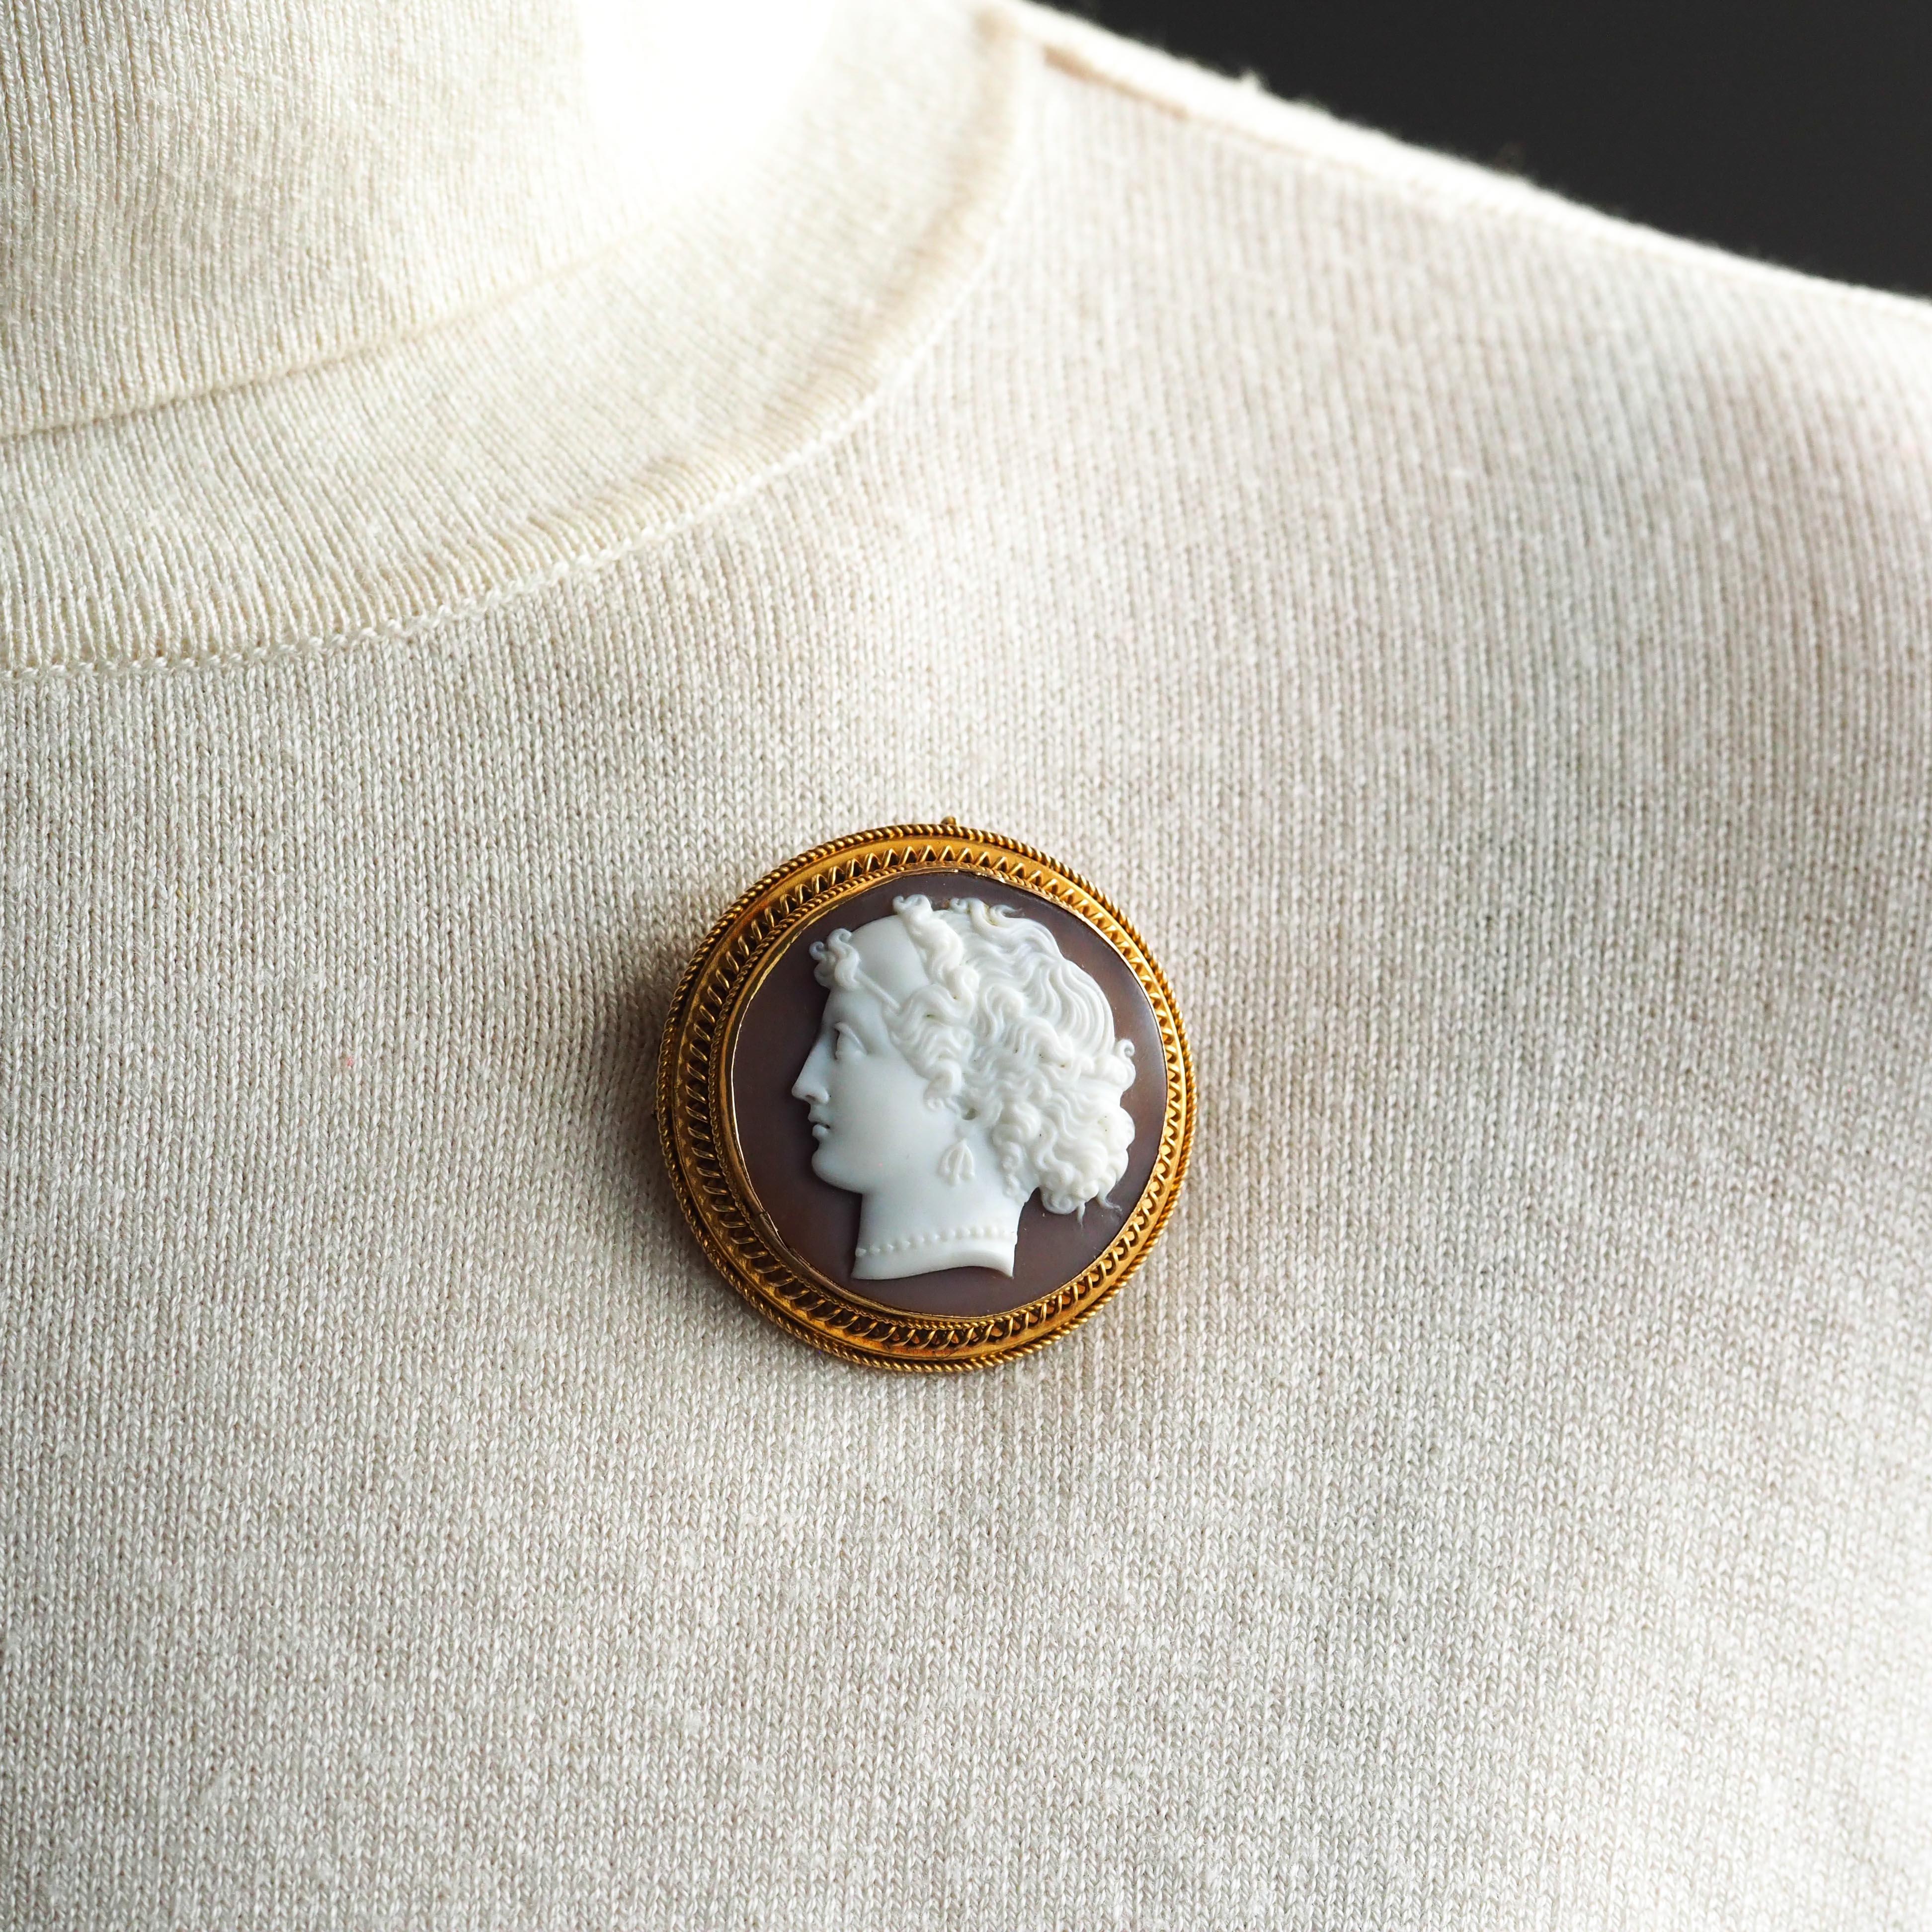 Antique Victorian Cameo 18K Gold Brooch/Pendant Necklace - c.1880 For Sale 2